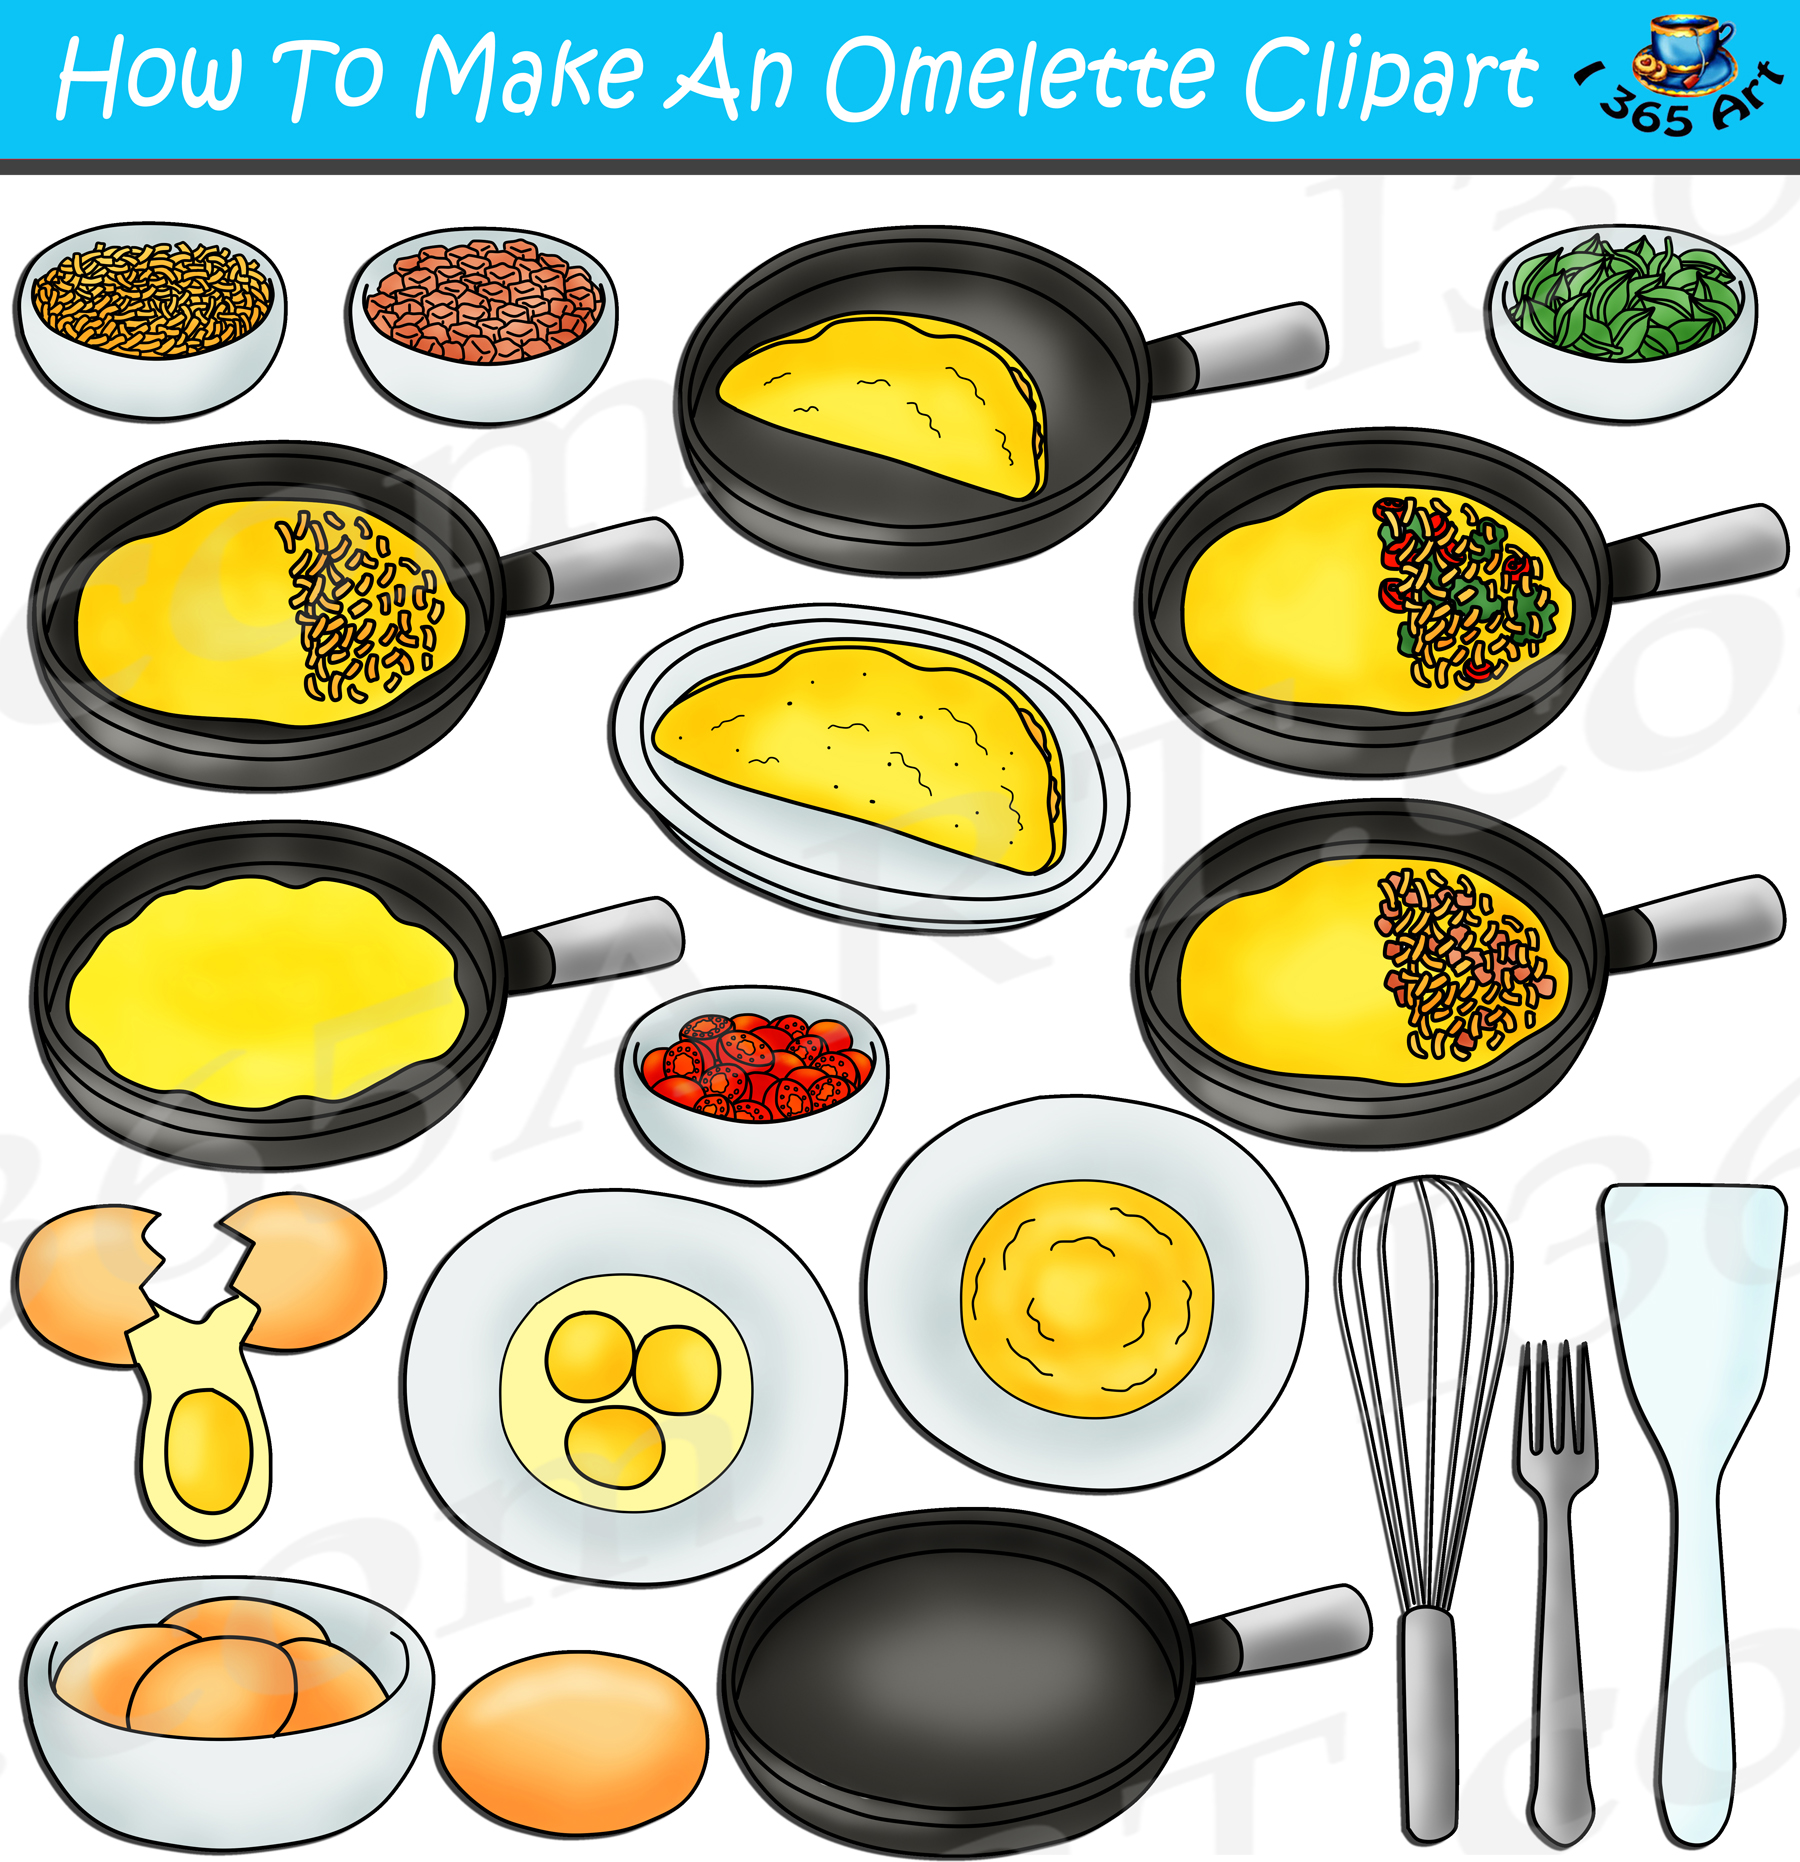 How To Make An Omelette Clipart Set Download Clipart 4 School,Streusel Topping